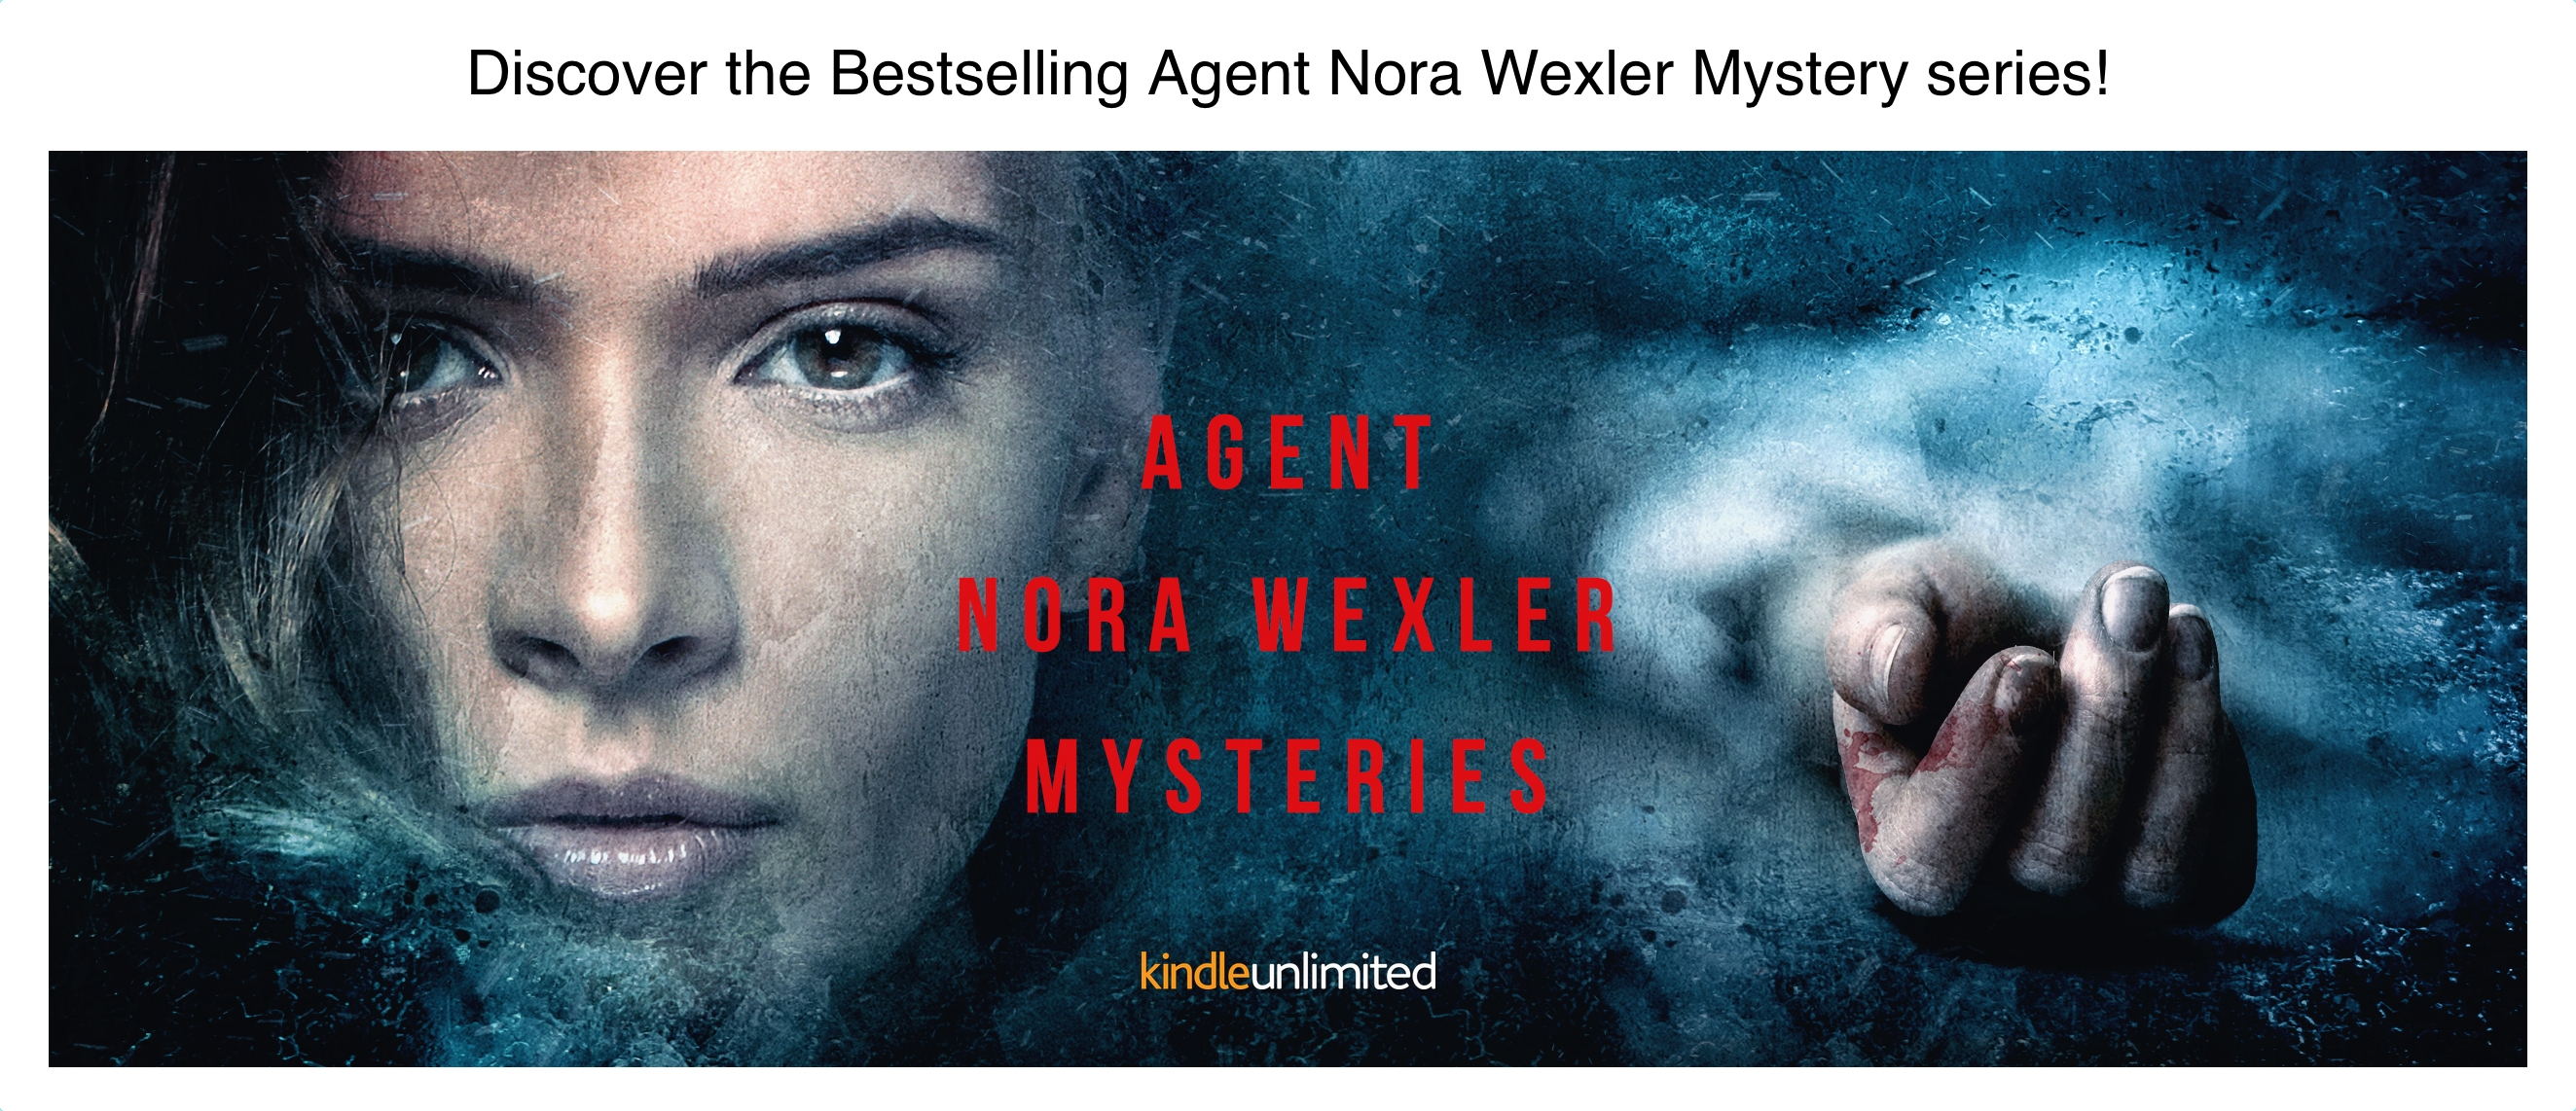 Discover the Bestselling Agent Nora Wexler Mystery Series!